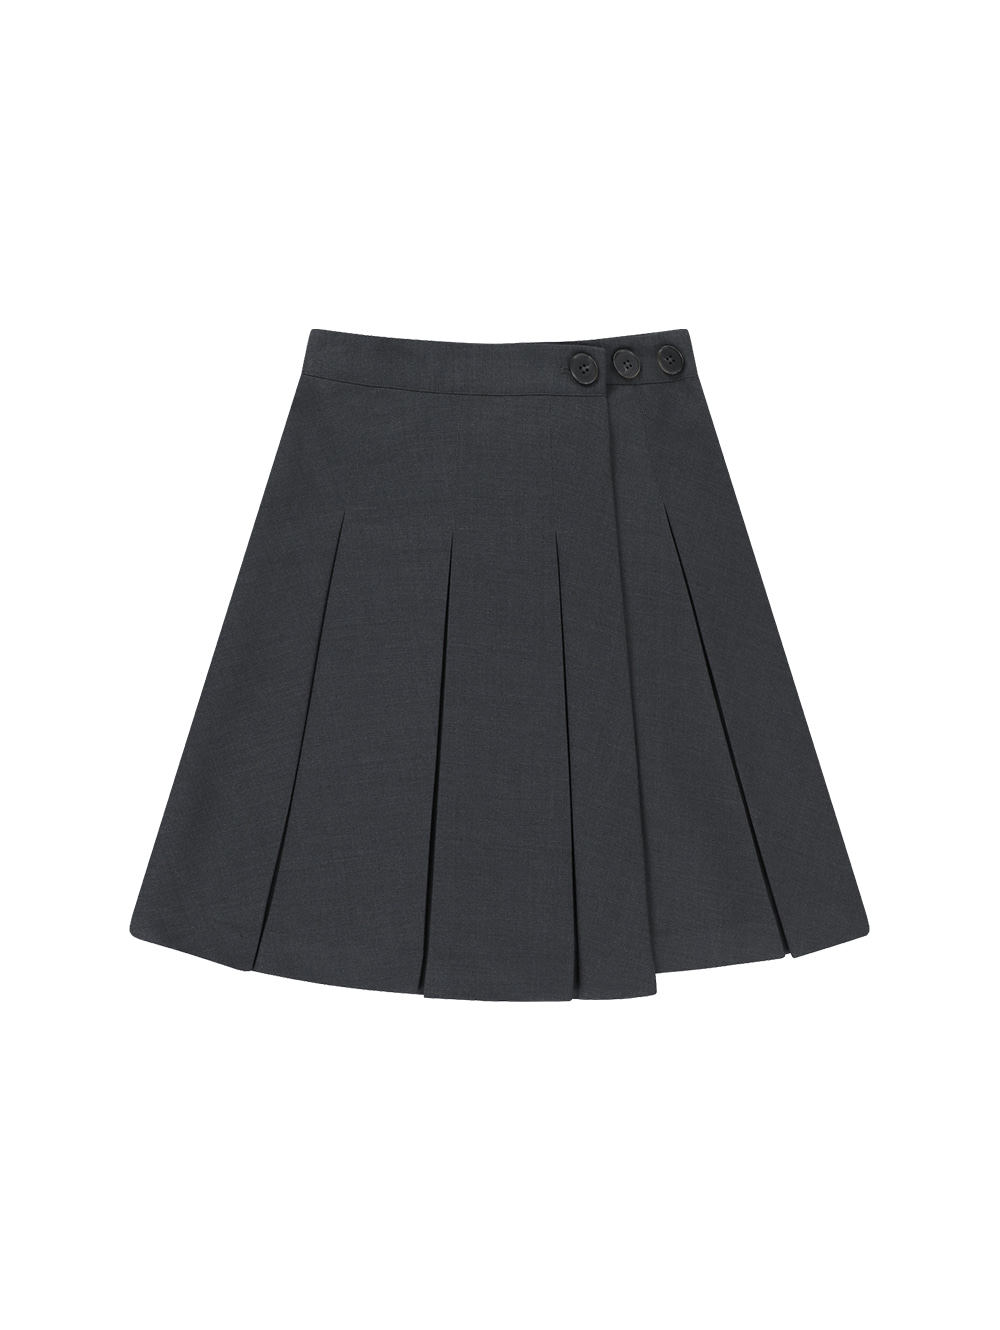 WRAPPED PLEATS SKIRT [CHARCOAL]